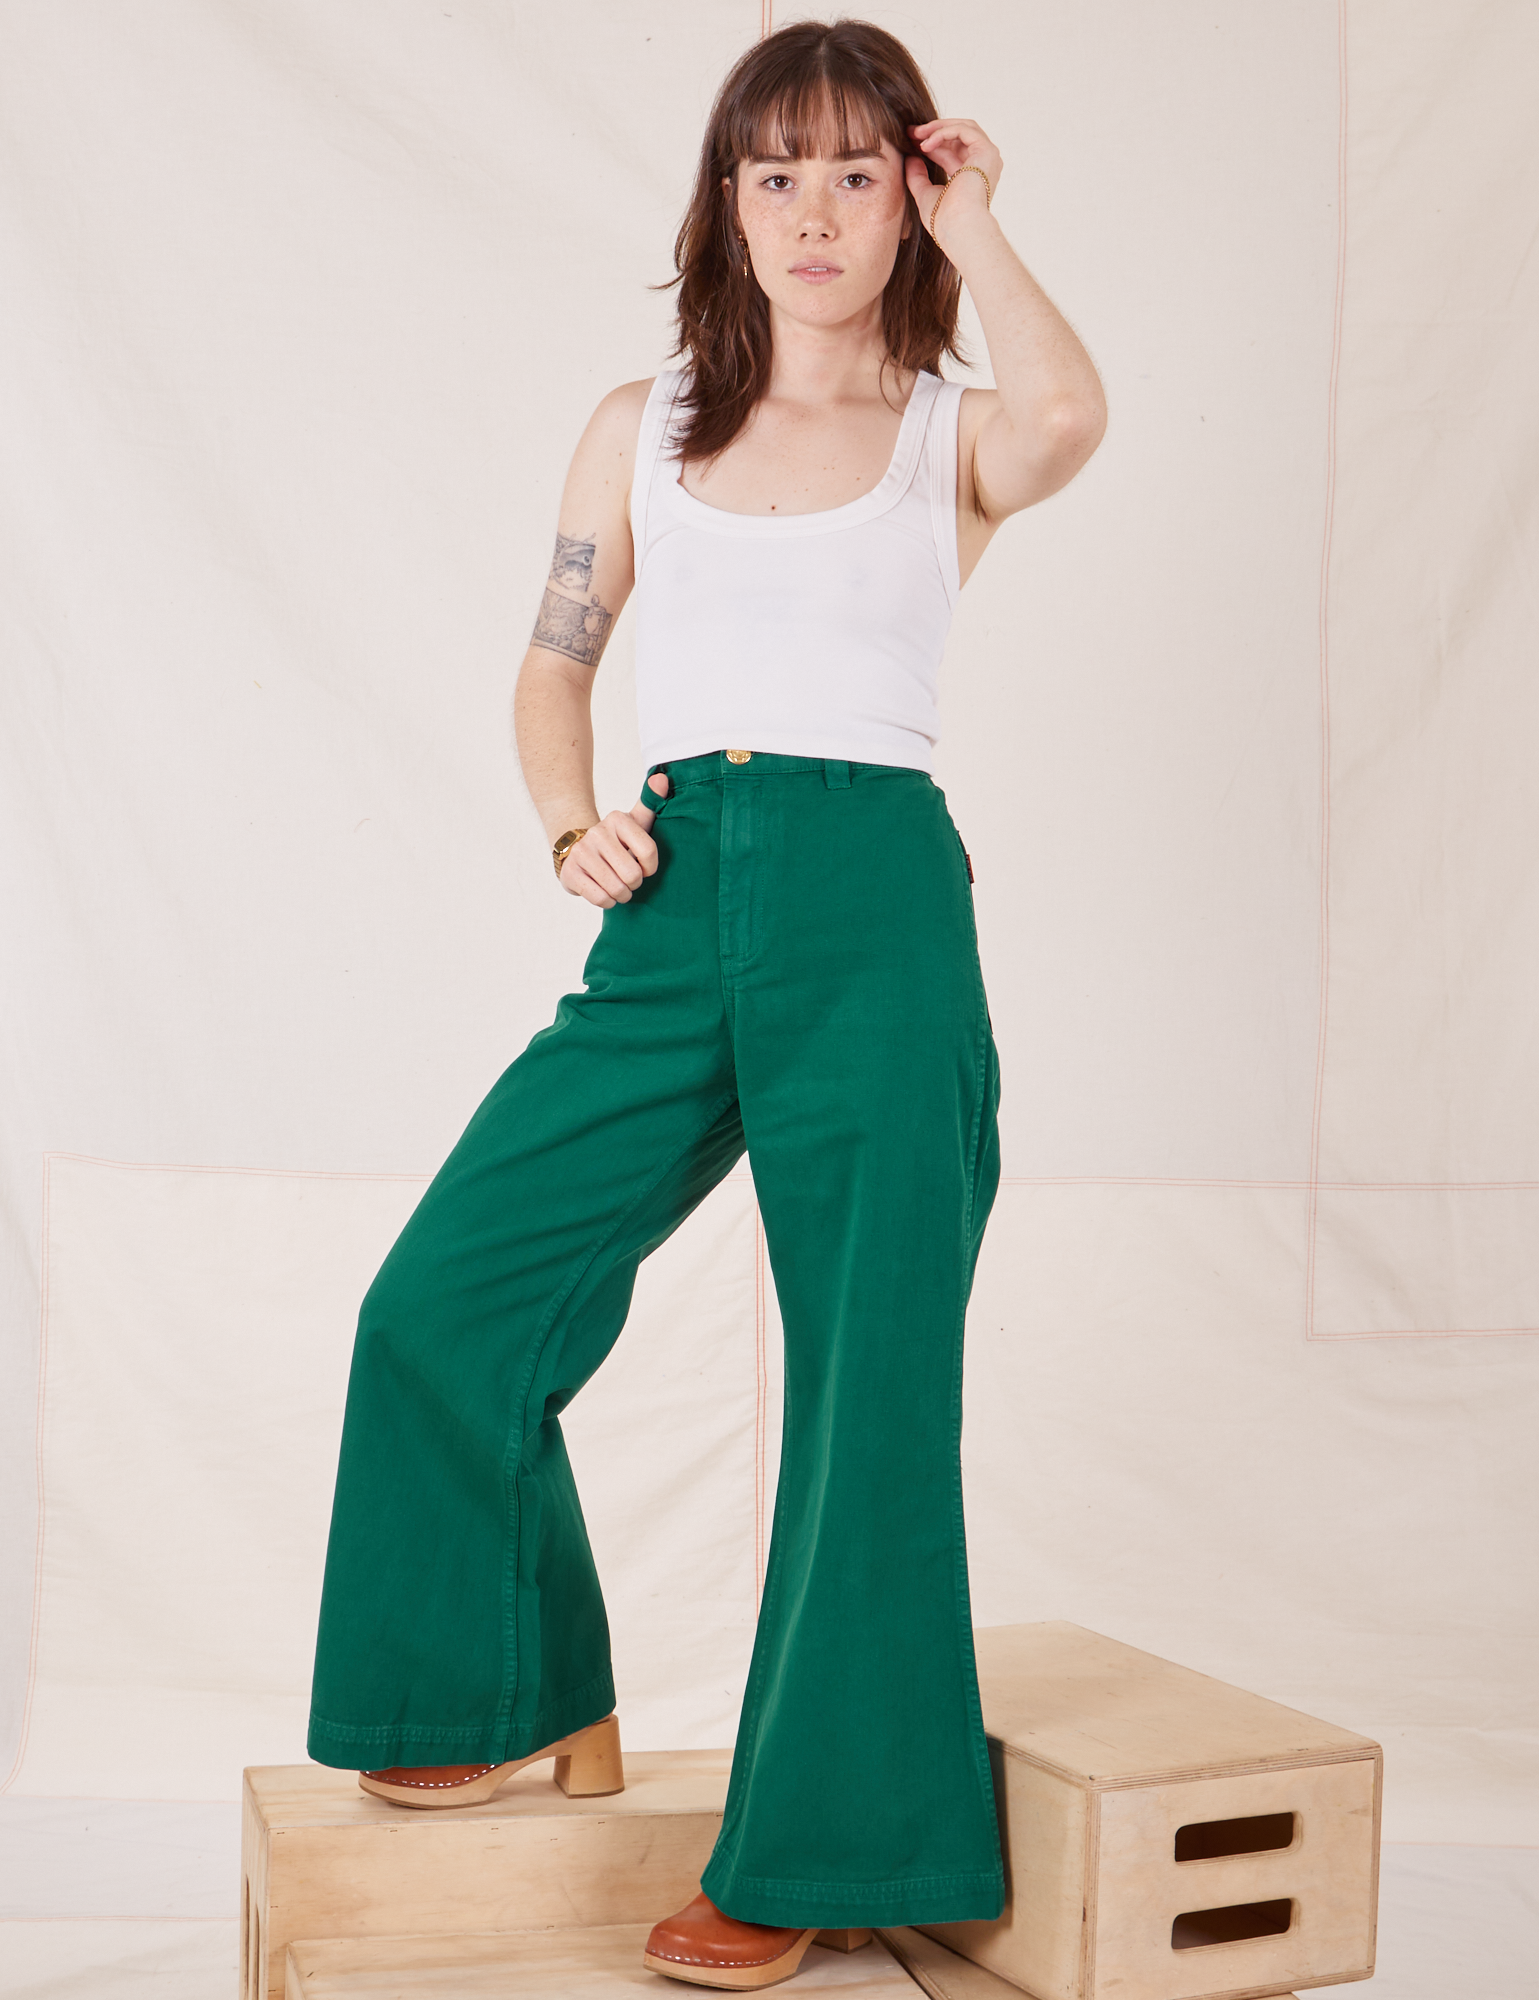 Hana is 5&#39;3&quot; and wearing P Bell Bottoms in Hunter Green paired with vintage off-white Cropped Tank Top